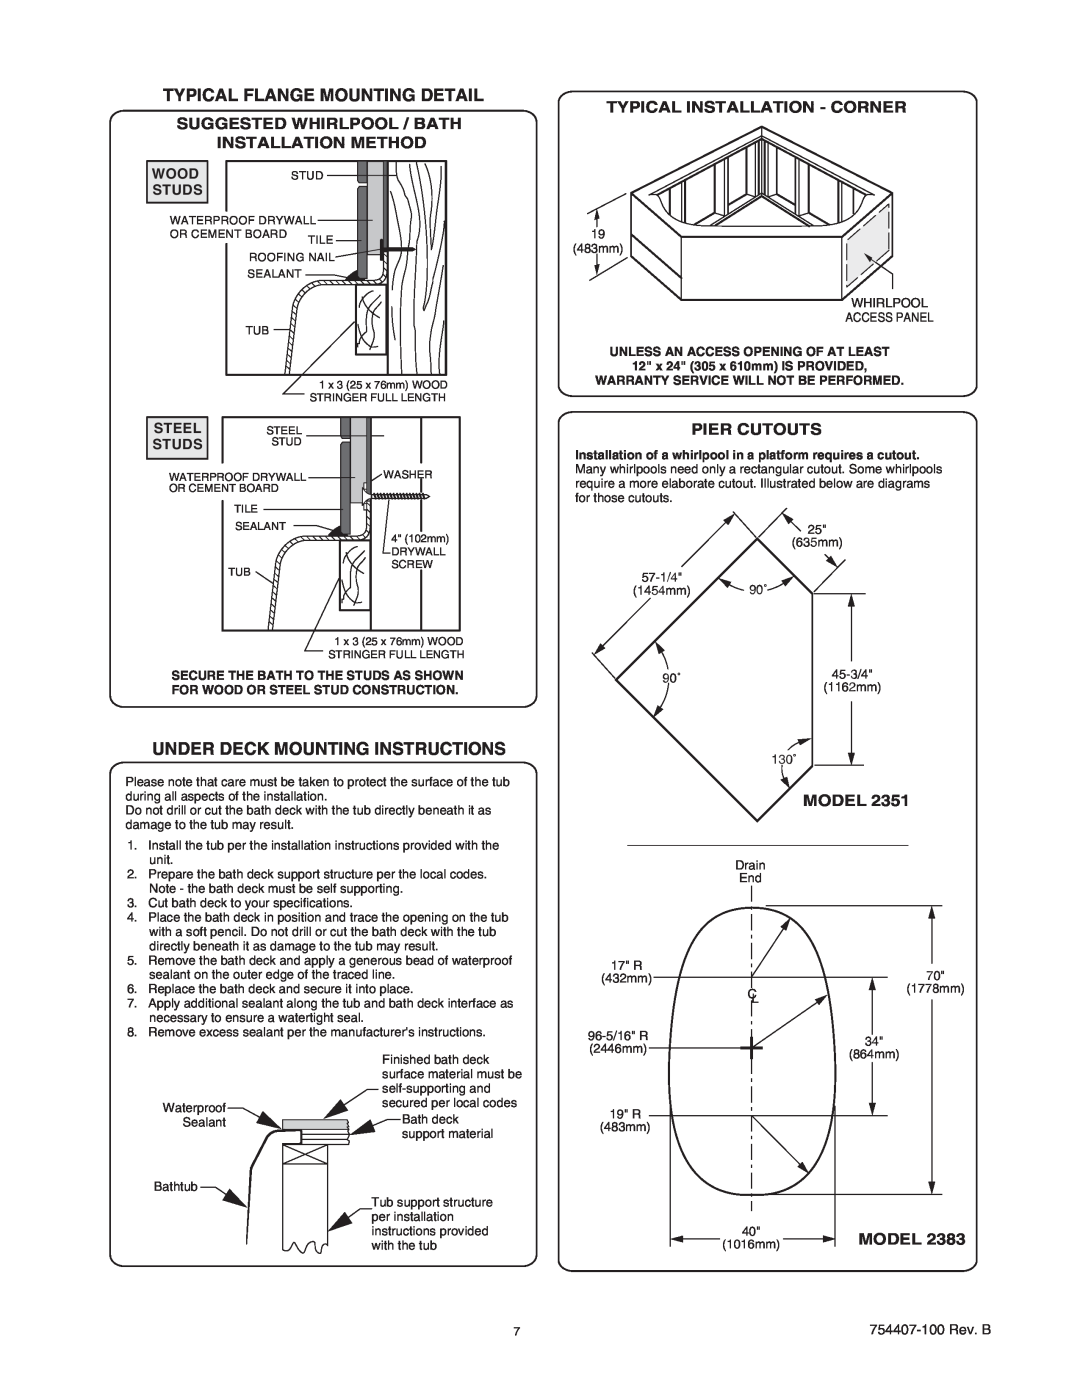 American Standard 2351 Typical Flange Mounting Detail, Under Deck Mounting Instructions, Typical Installation - Corner 